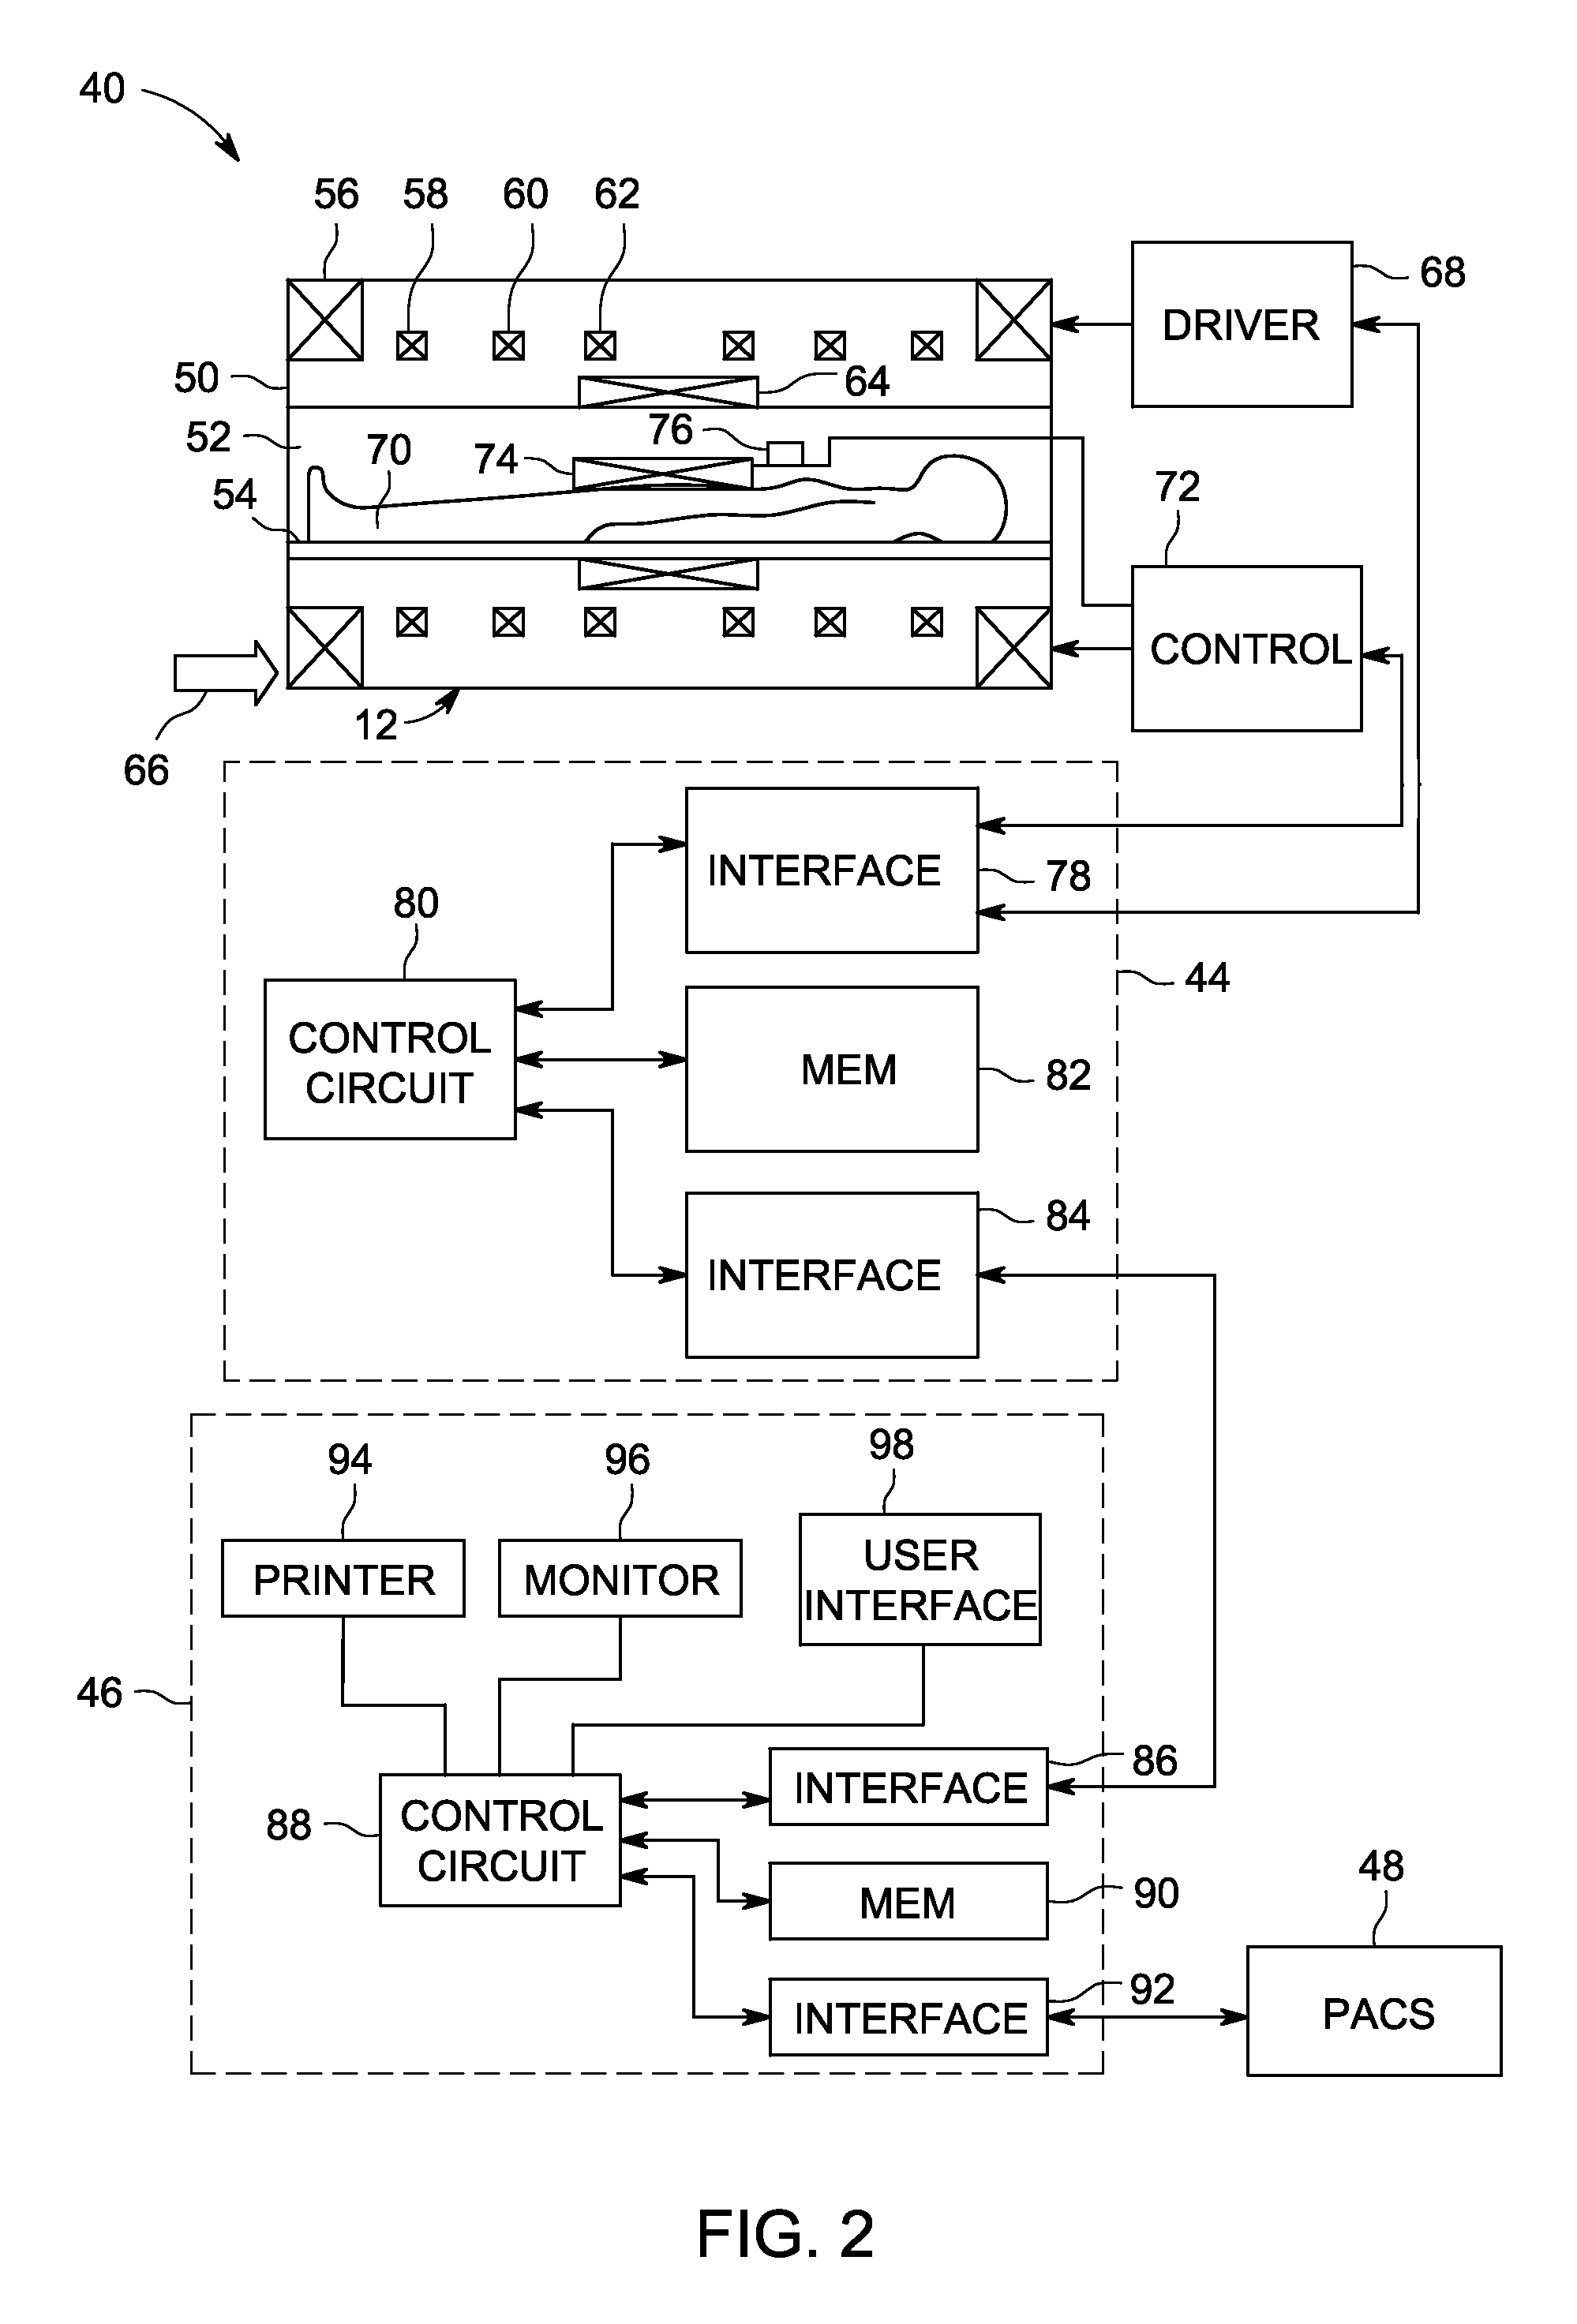 Photonic system and method for optical data transmission in medical imaging systems